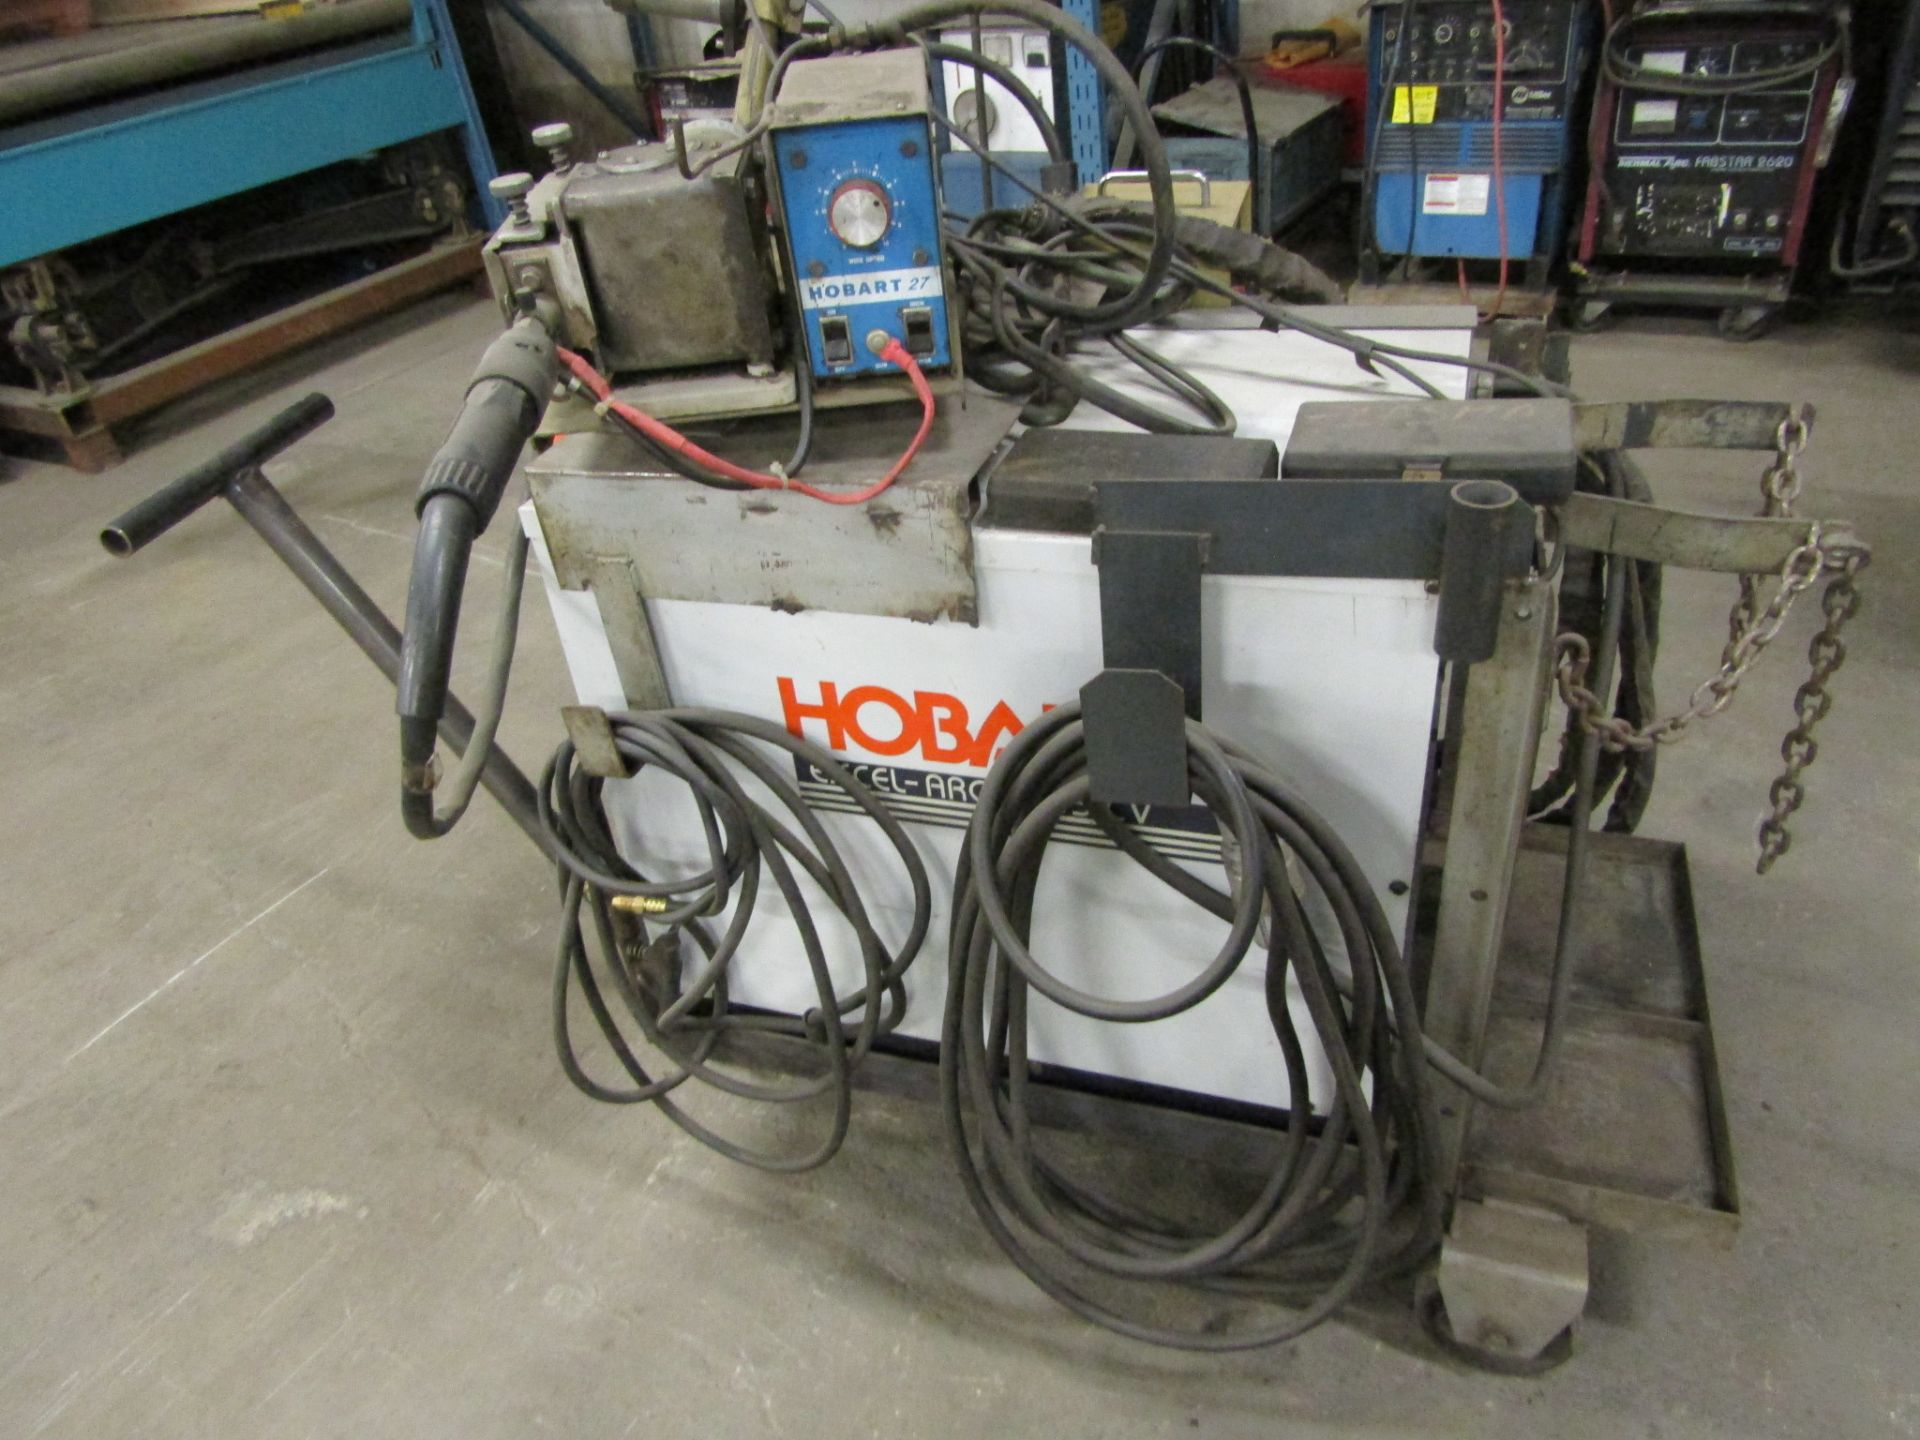 Hobart Excel-Arc 6045 CV Mig Welder with SPOOL GUN and wire feeder 450 AMP - Image 2 of 2